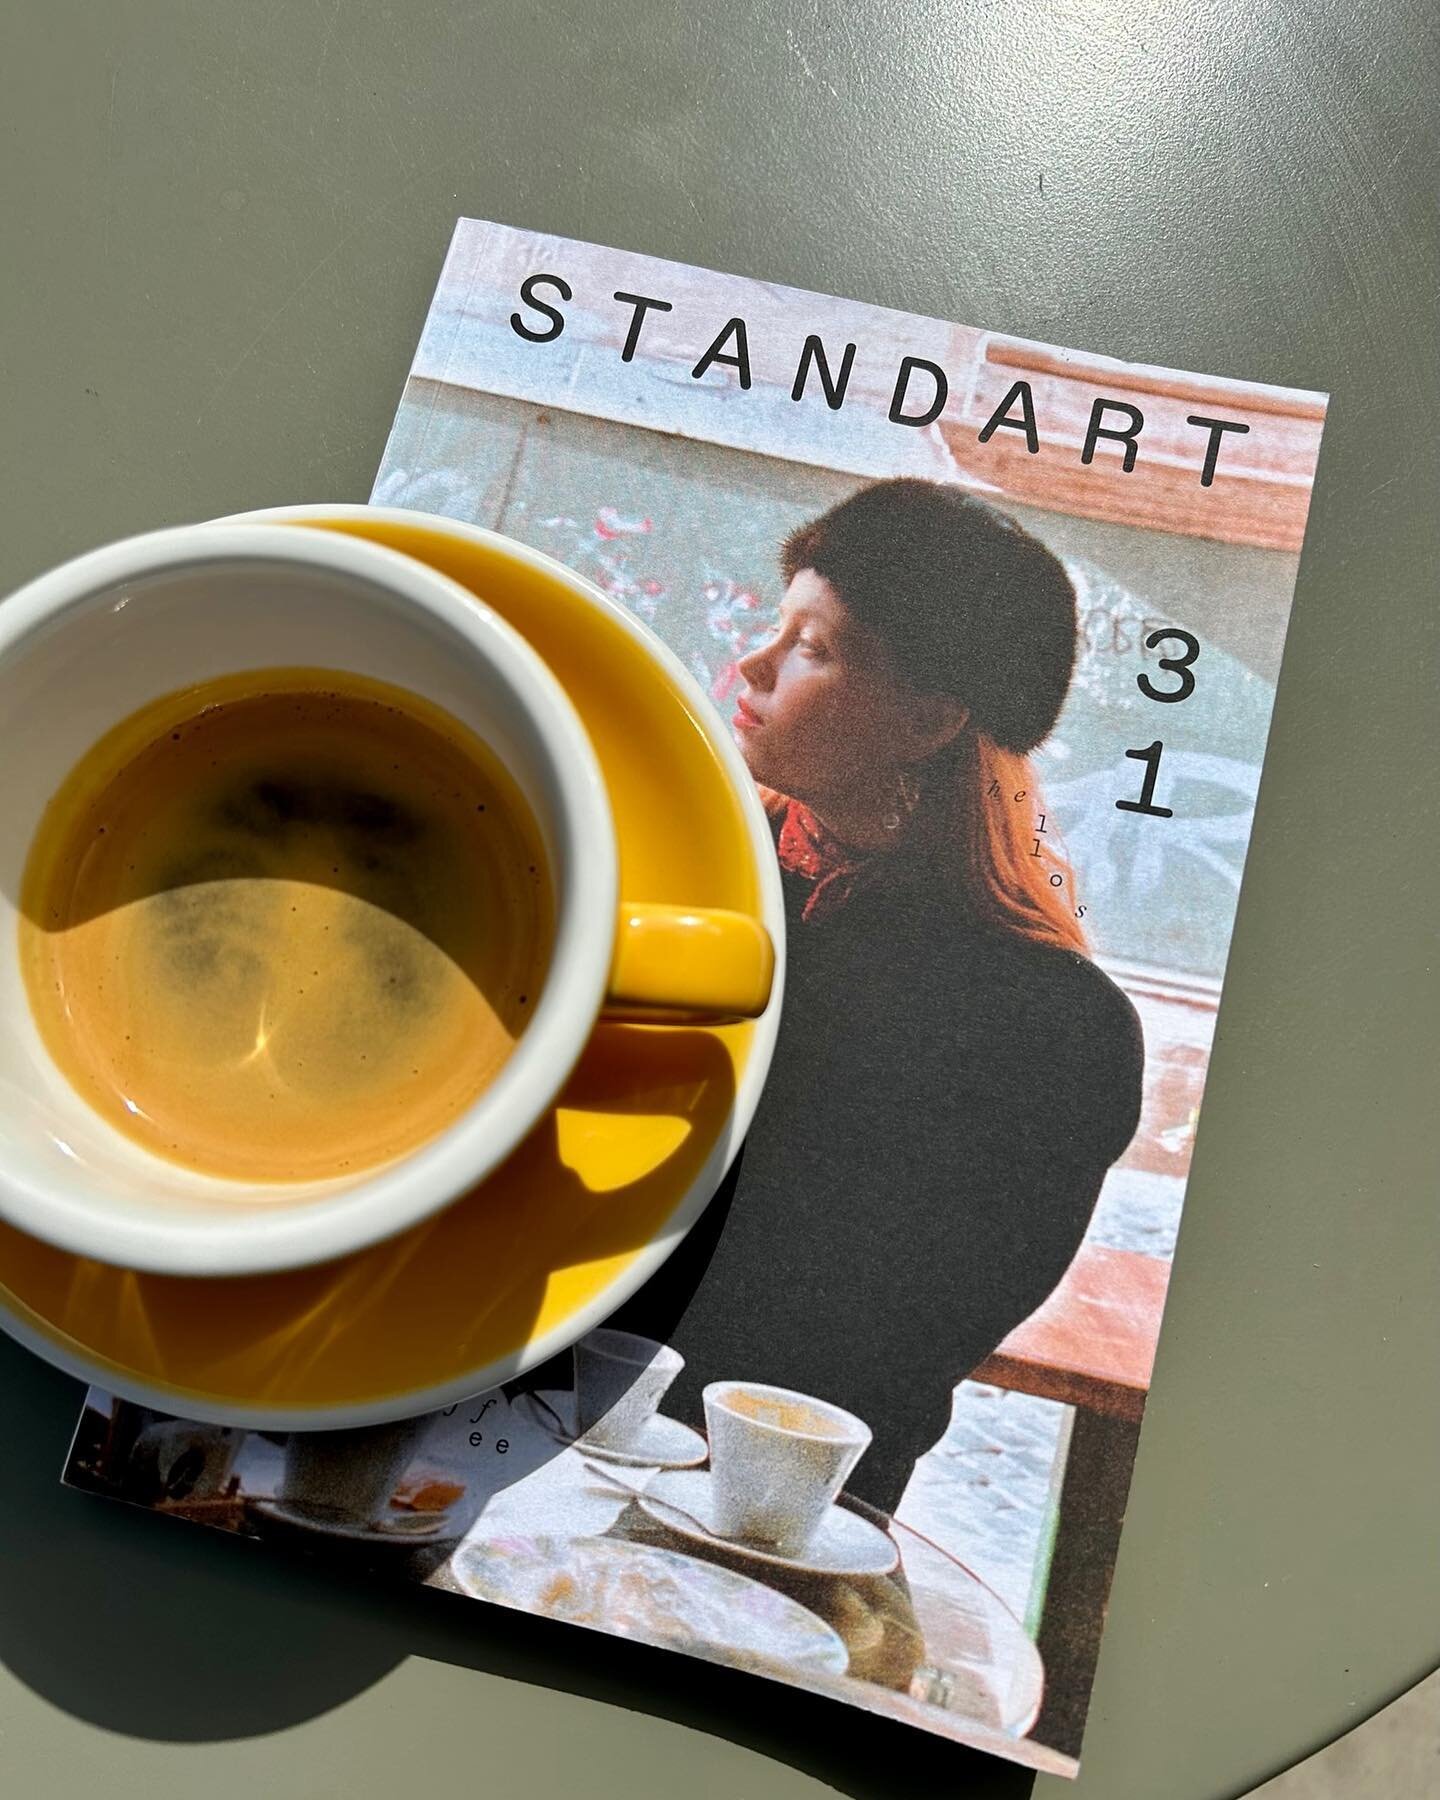 Hey Hey Hooo! 👋🏽
&bull;
This is the last week you can enjoy a coffee and have a read at our shop before we close for our annual holidays 🎉
&bull;
The latest Standart Magazine Edition featured an interesting article with @valtteribottas ! For the o